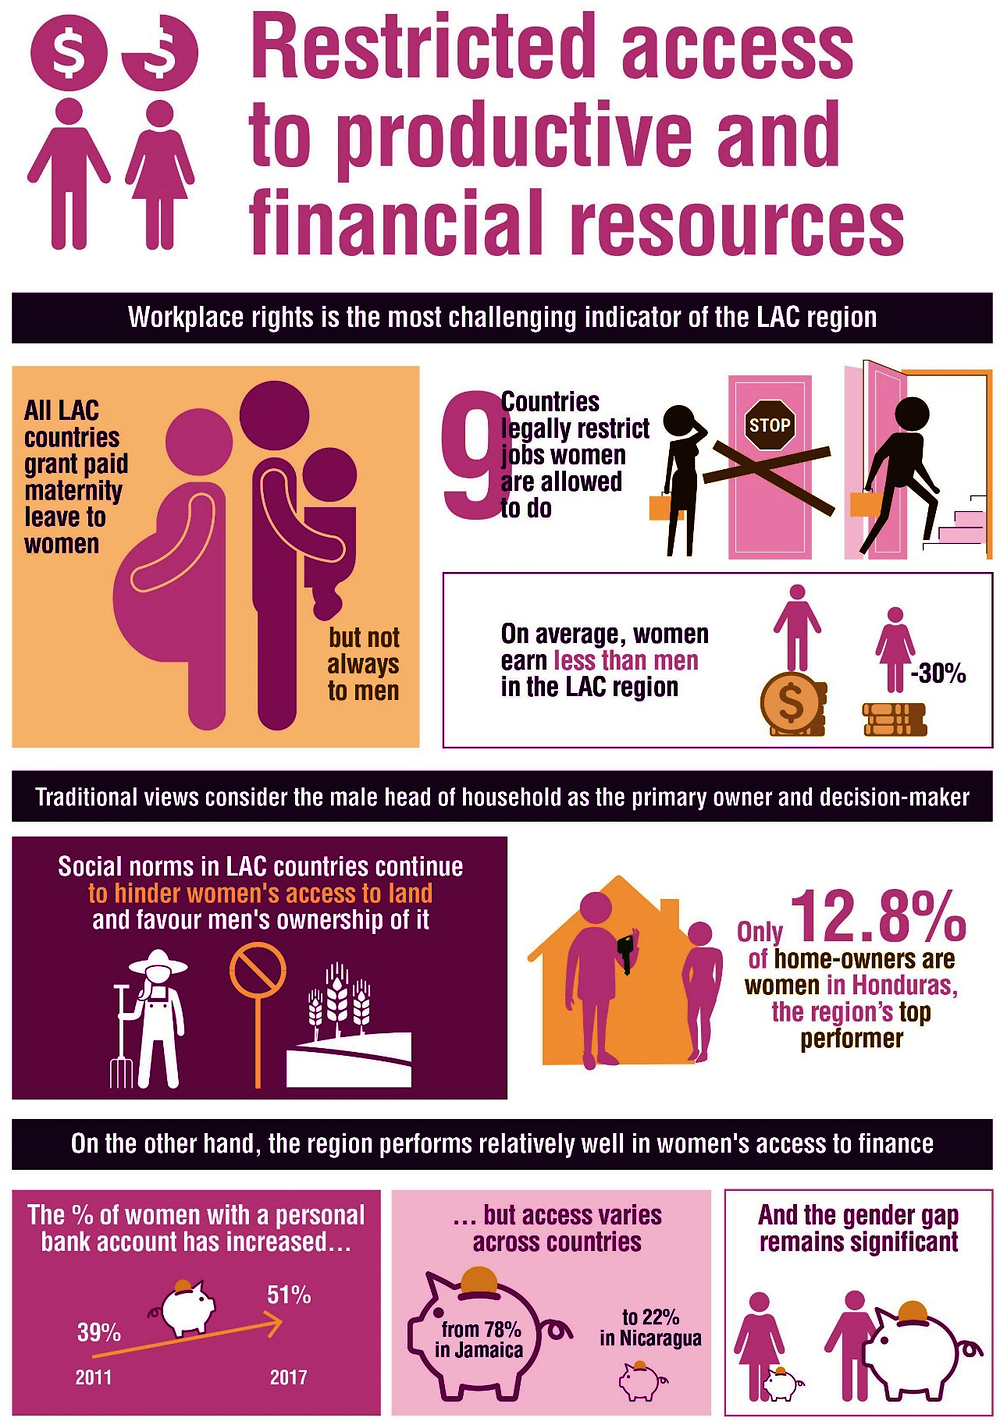 Infographic 5.1. Restricted access to productive and financial resources 